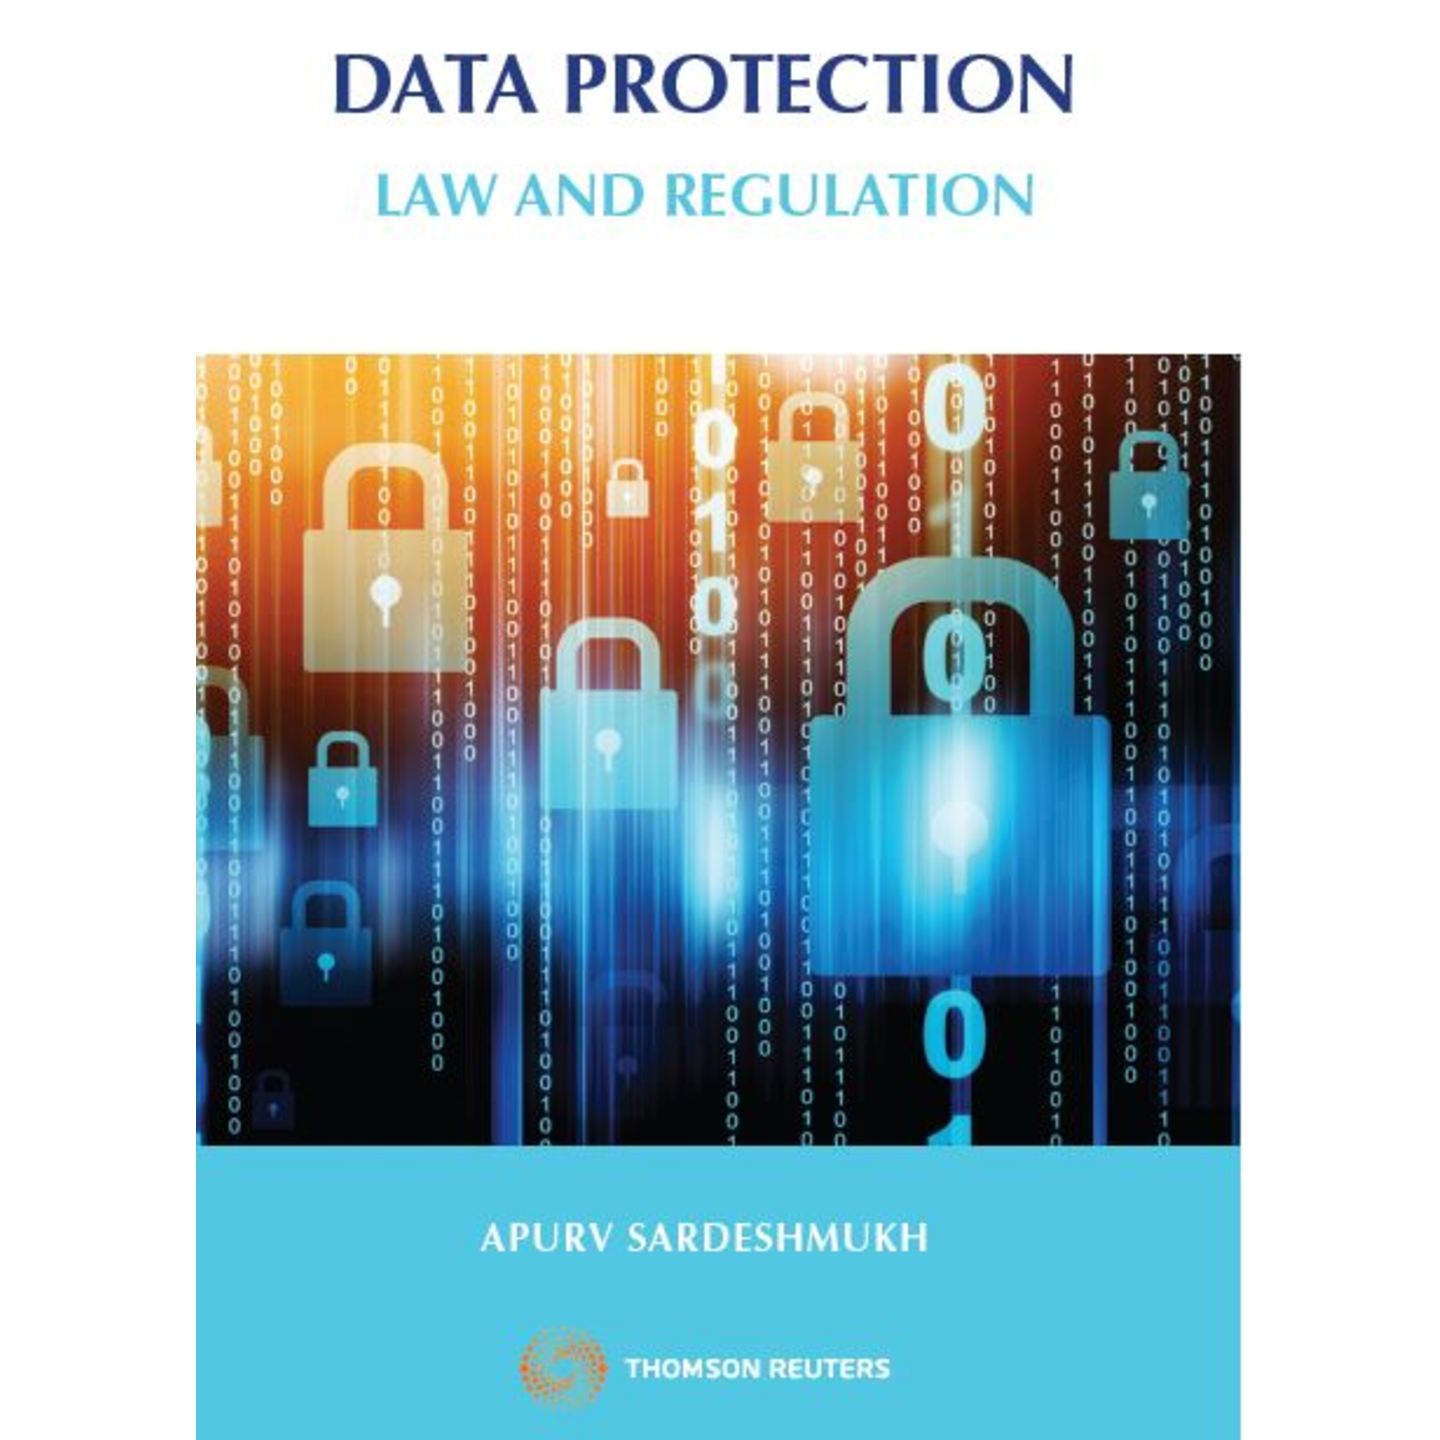 Data Protection - Laws and Regulation